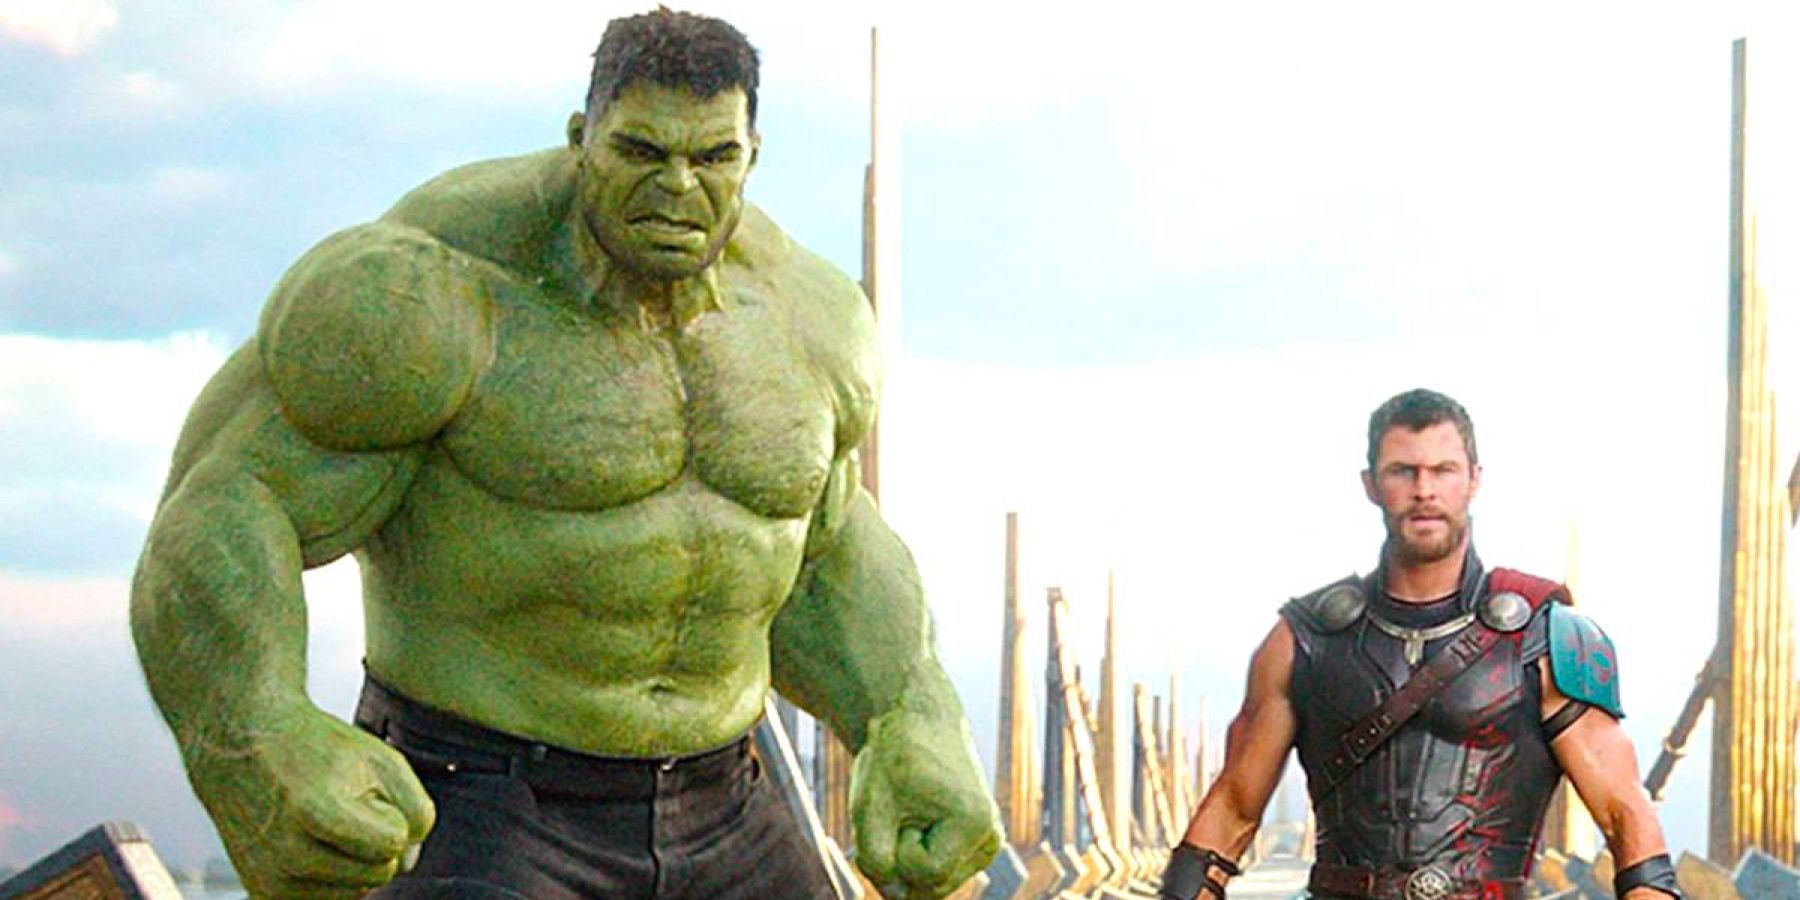 The Hulk (played by actor Mark Ruffalo), and Thor (played by actor Chris Hemsworth), ready themselves for battle on the Rainbow Bridge of Asgard in Thor: Ragnarok.